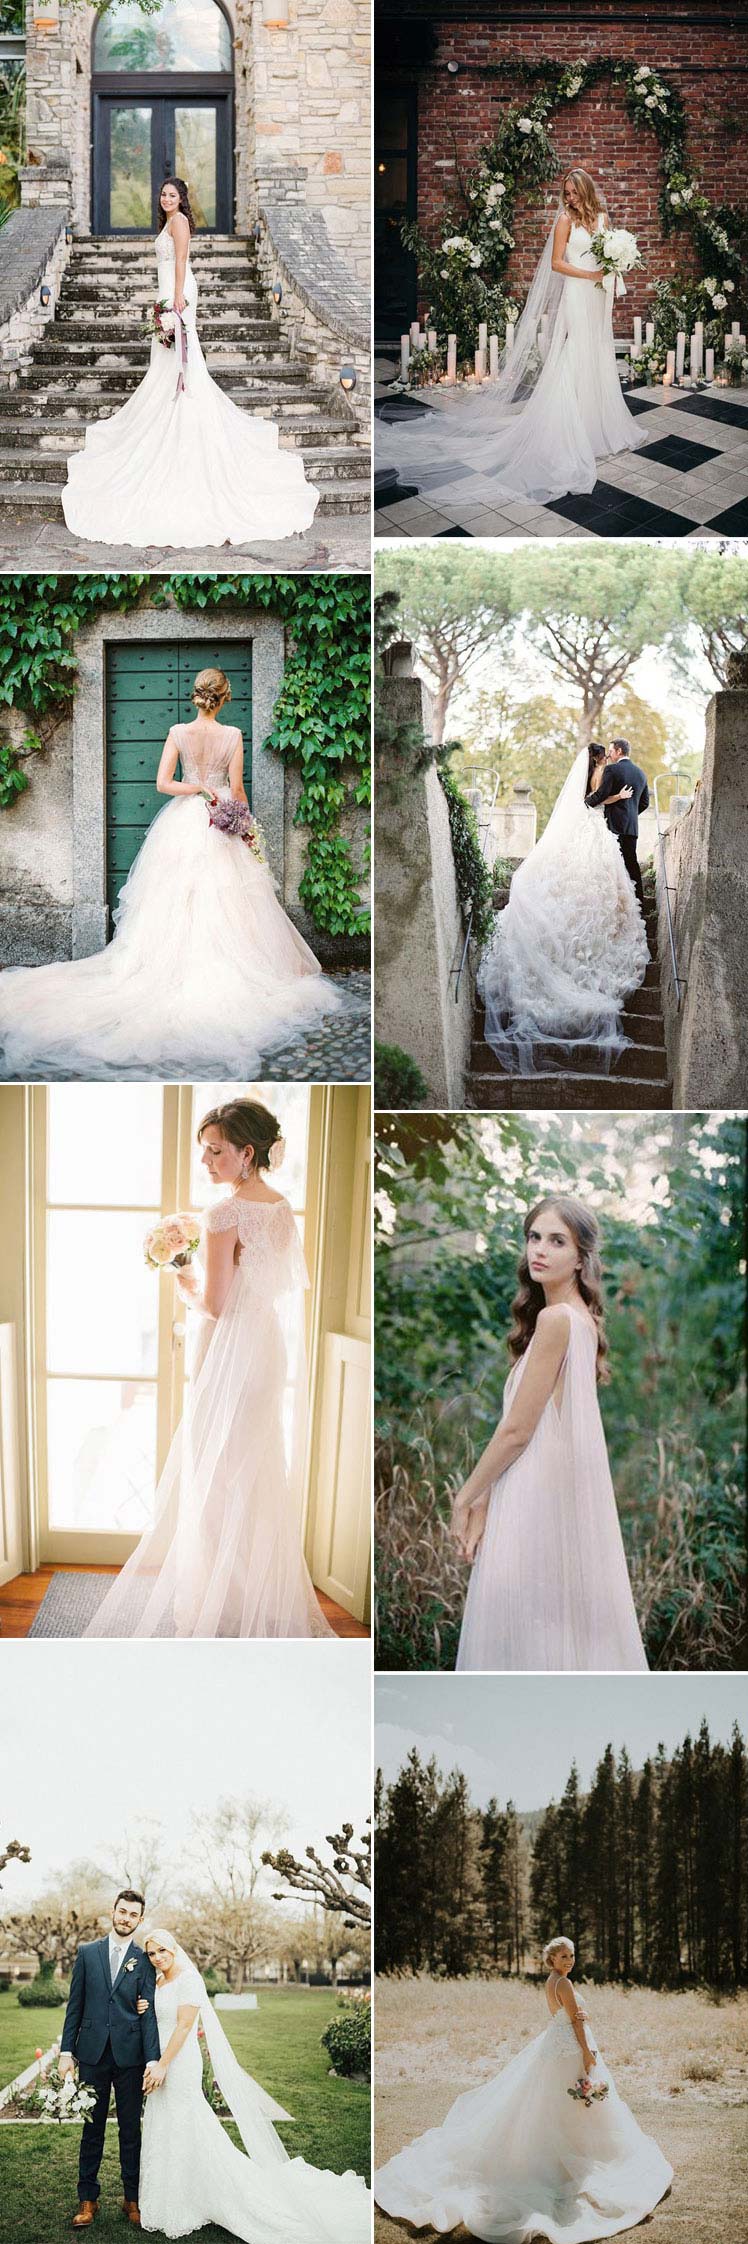 Inspiration for choosing a wedding dress with a train